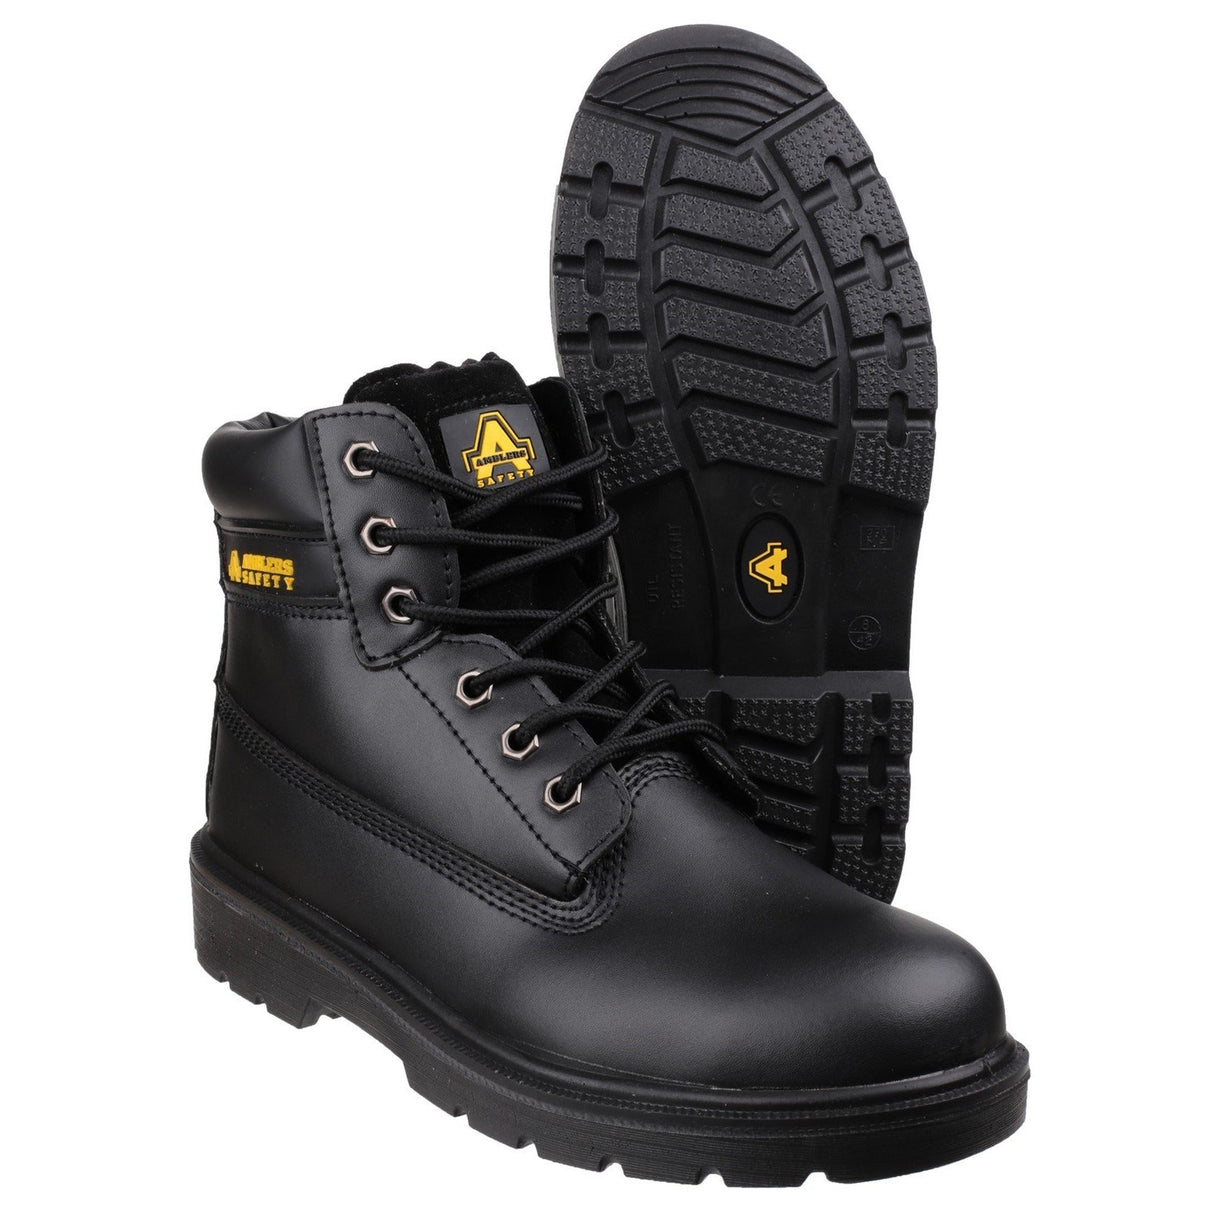 Amblers Safety Leather Work Safety Boots